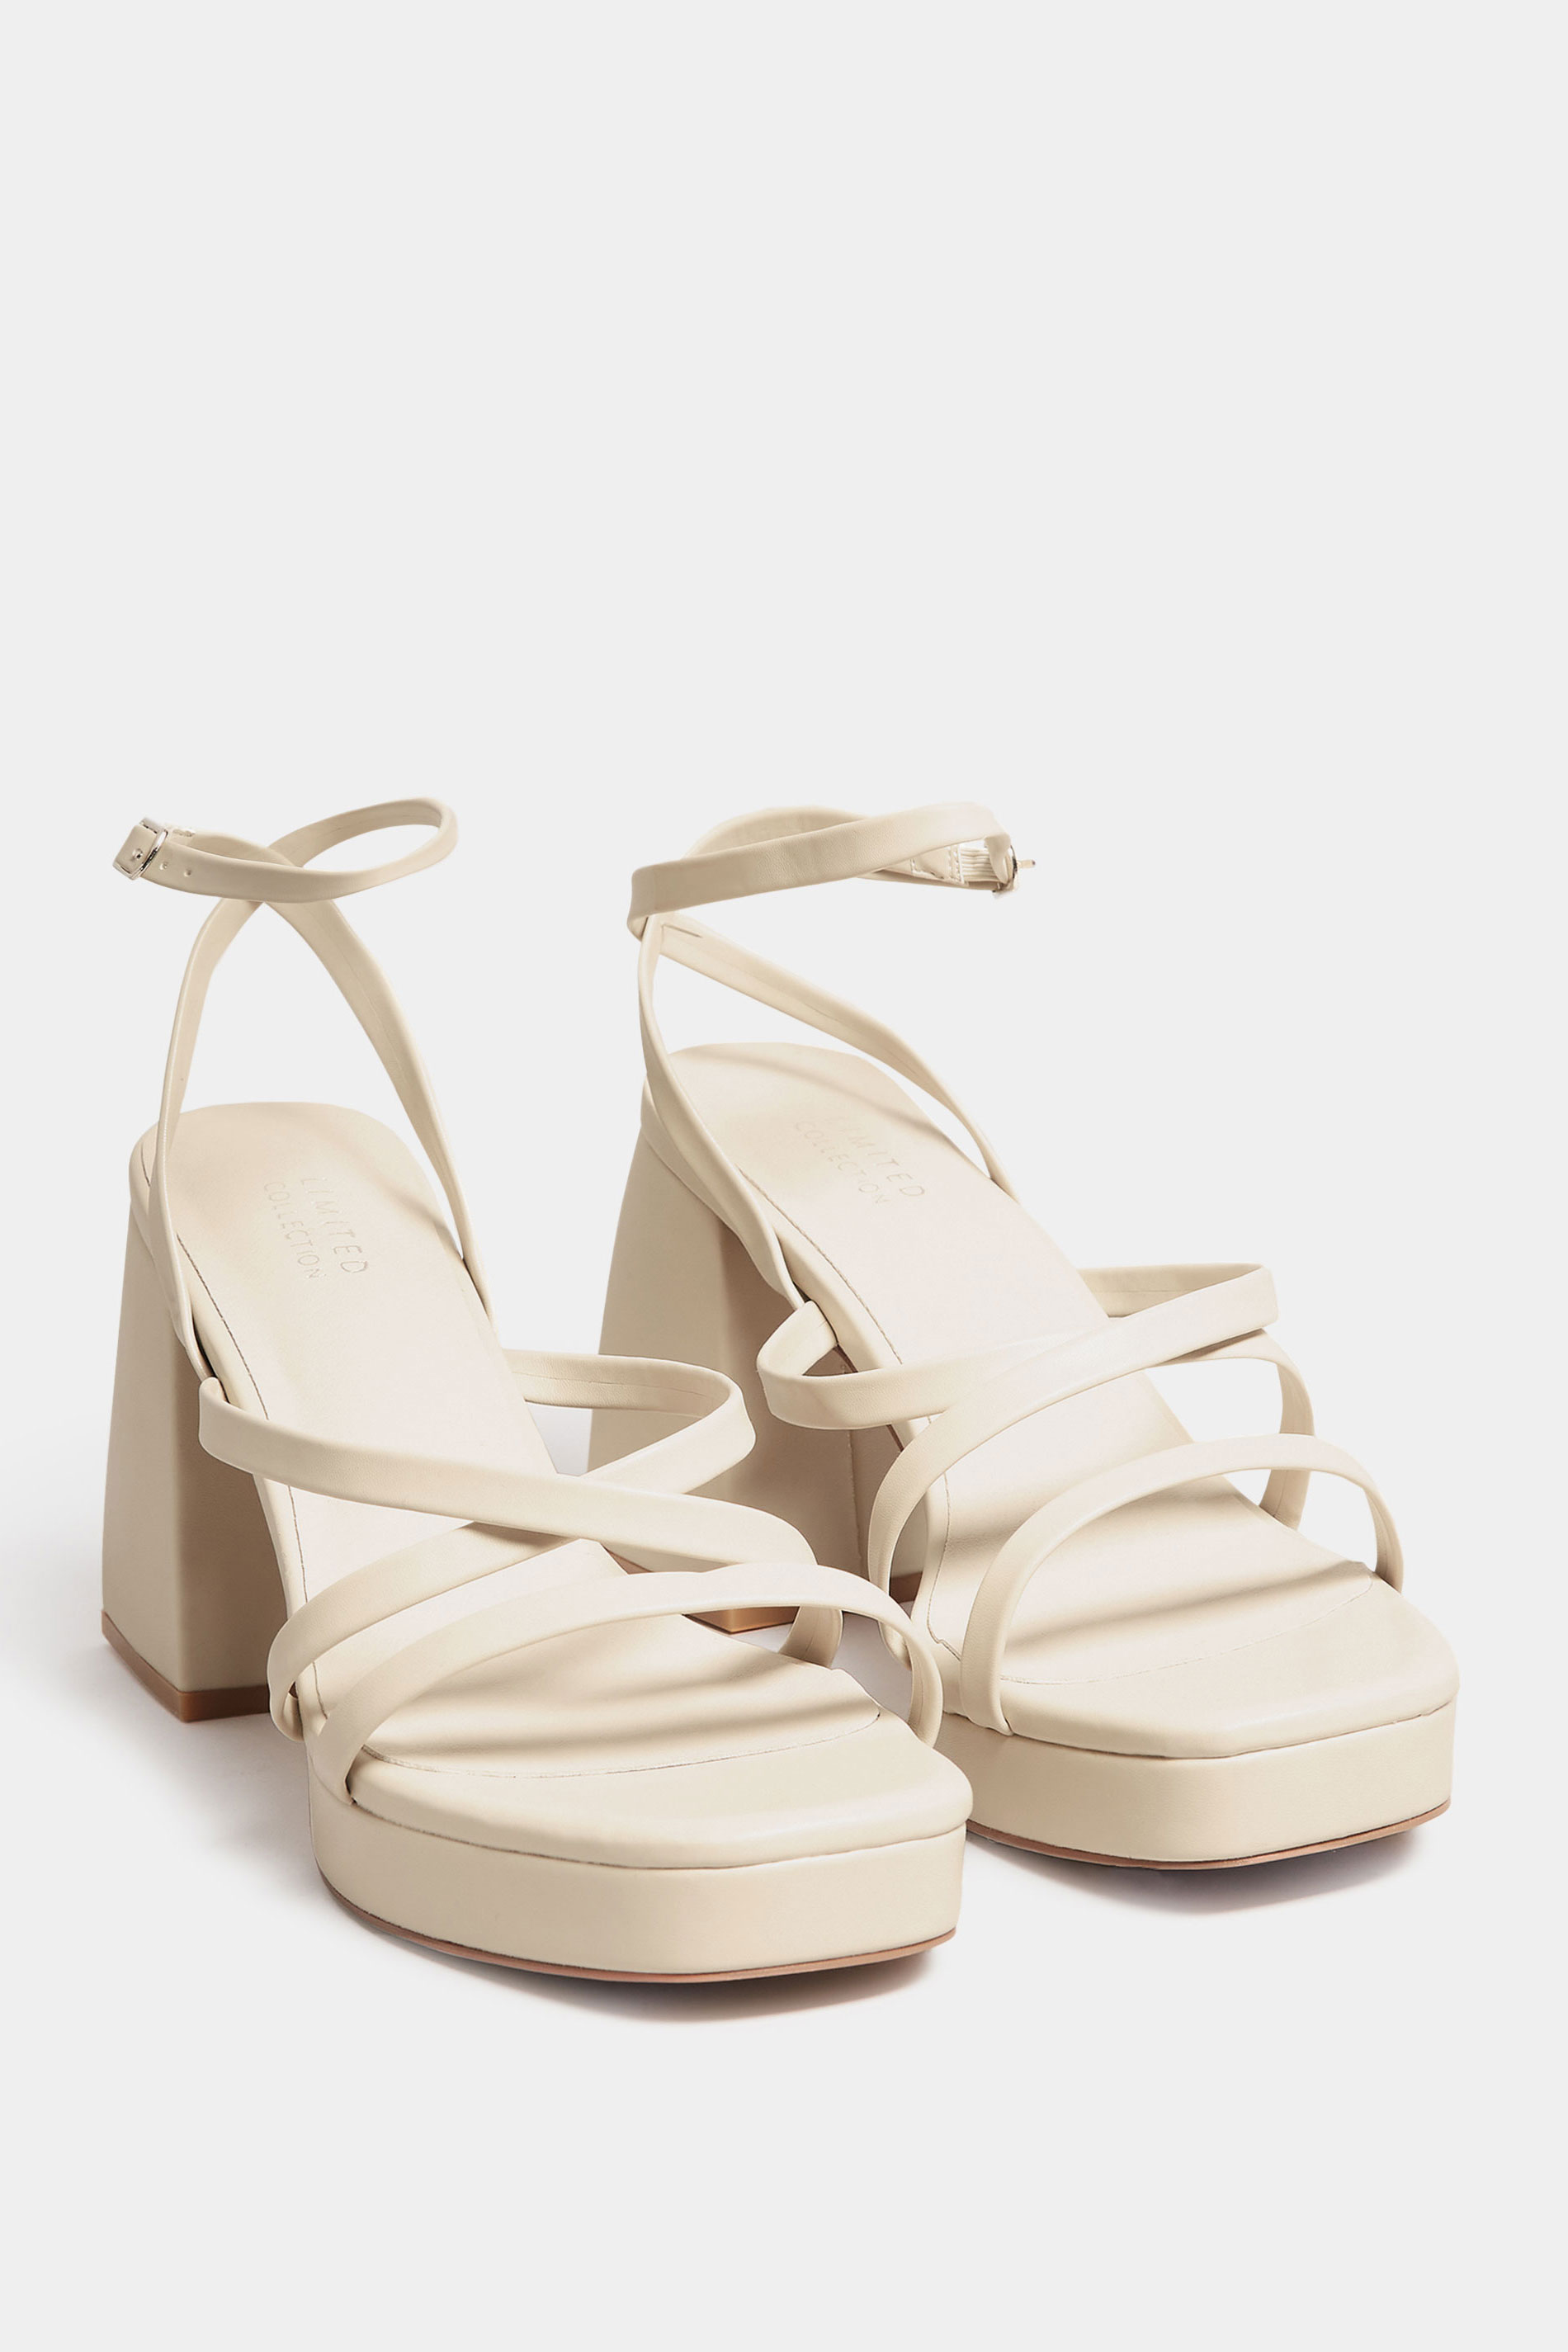 LIMITED COLLECTION Cream Strappy Platform Block Heel Sandals | Yours Clothing  2